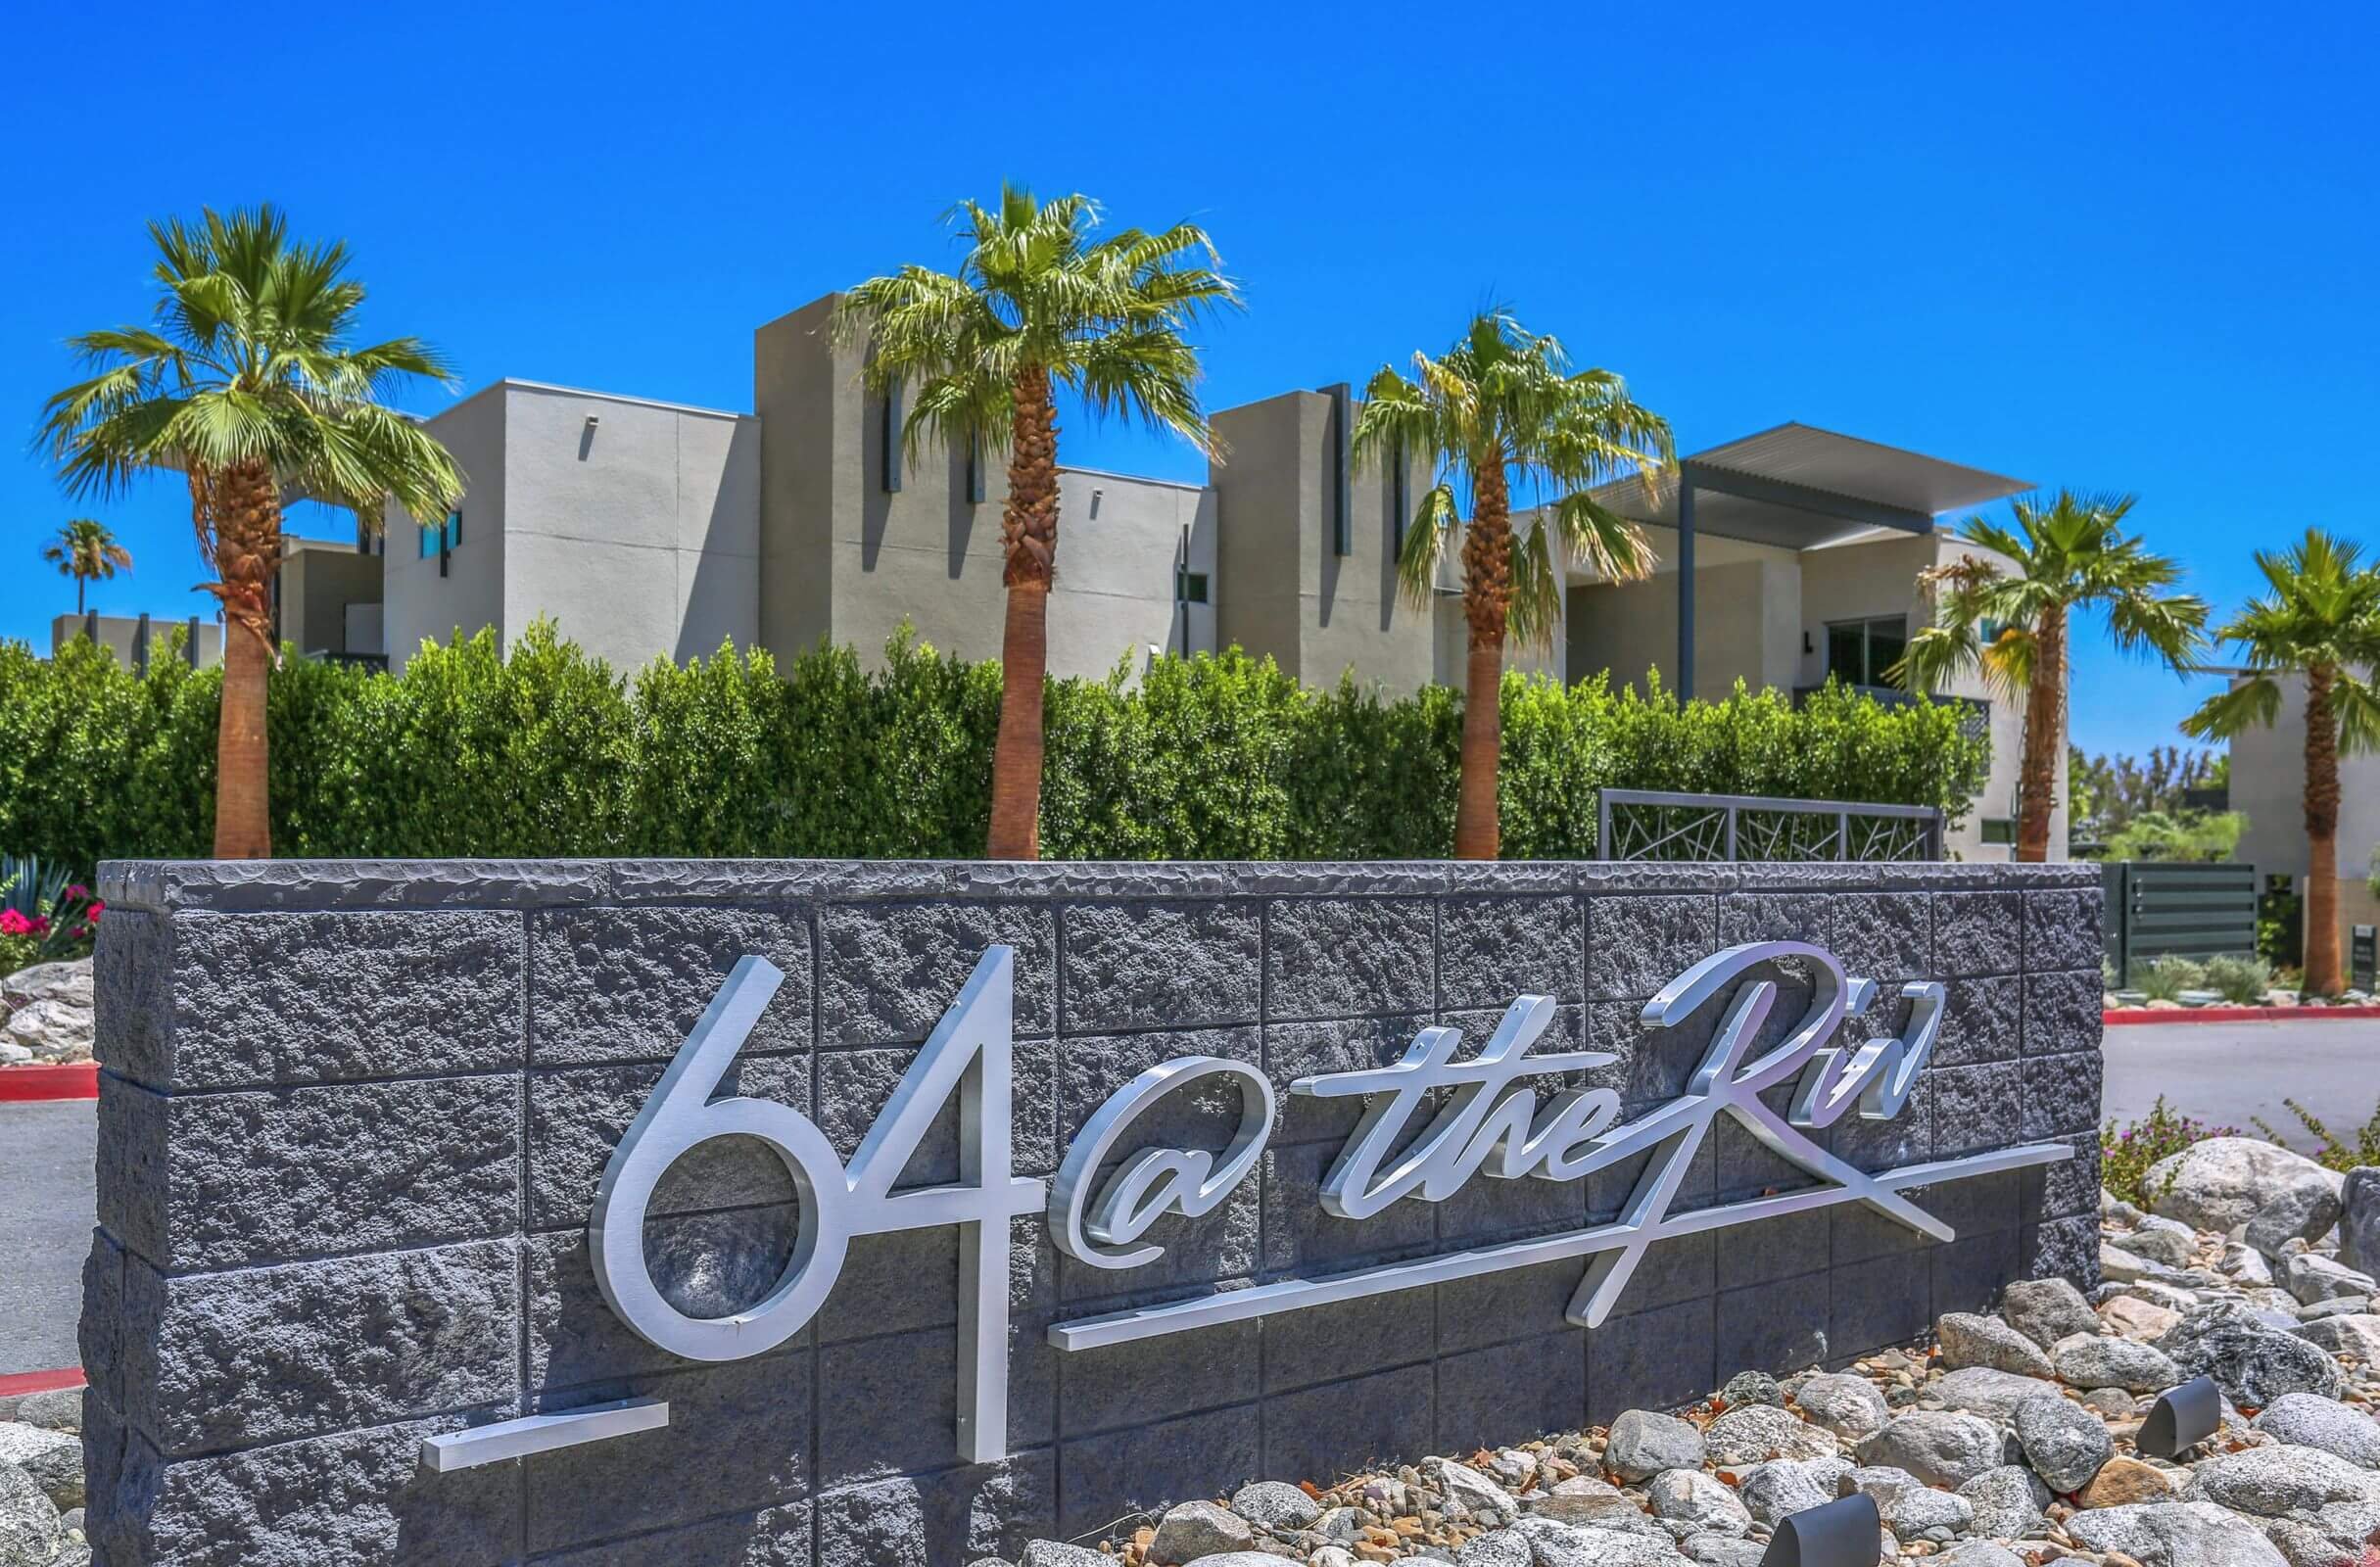 64 at The Riv Real Estate